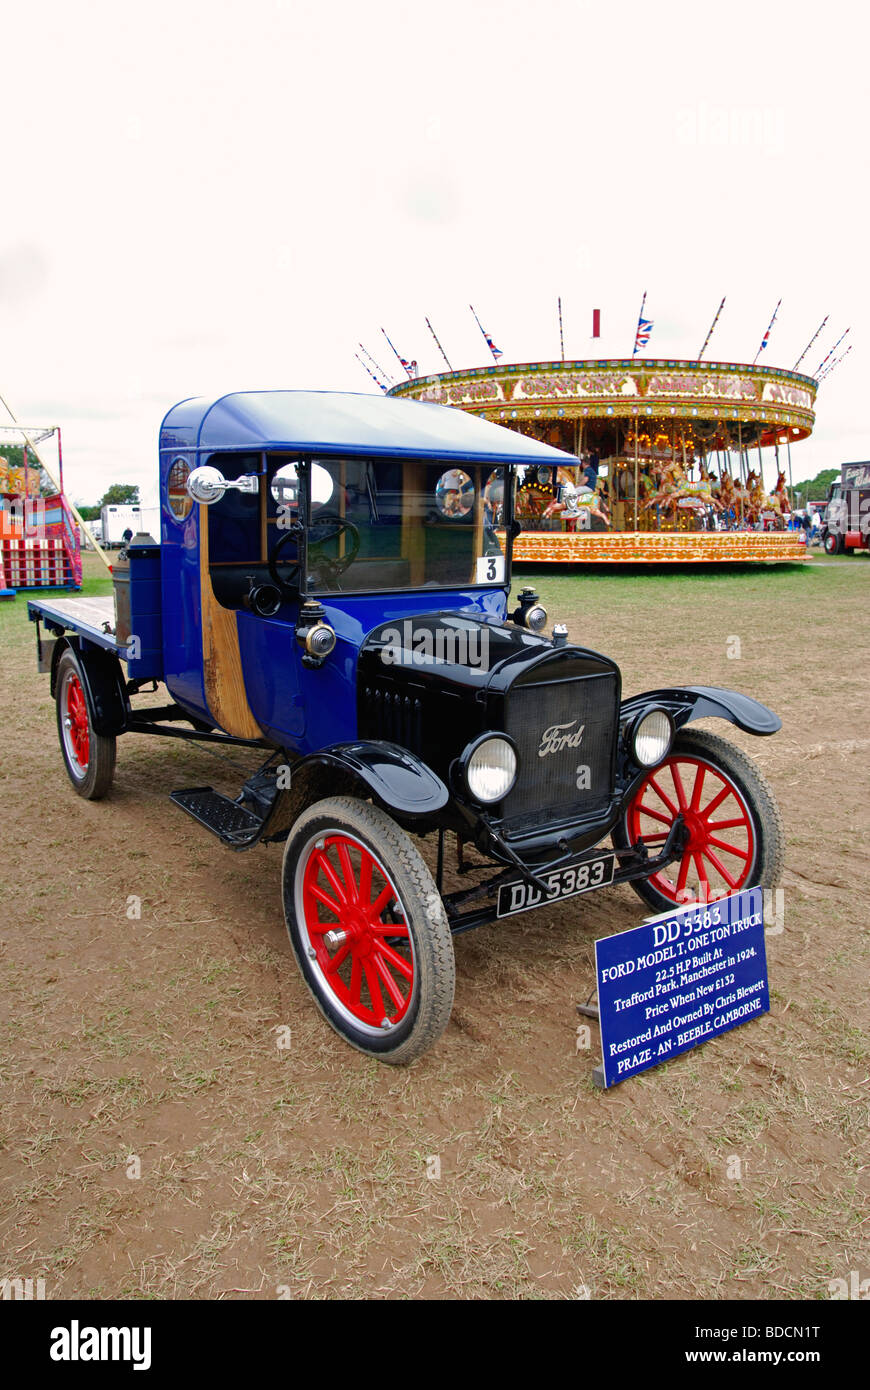 an old restored ' model T ford truck ' at a vintage car rally in cornwall, uk Stock Photo